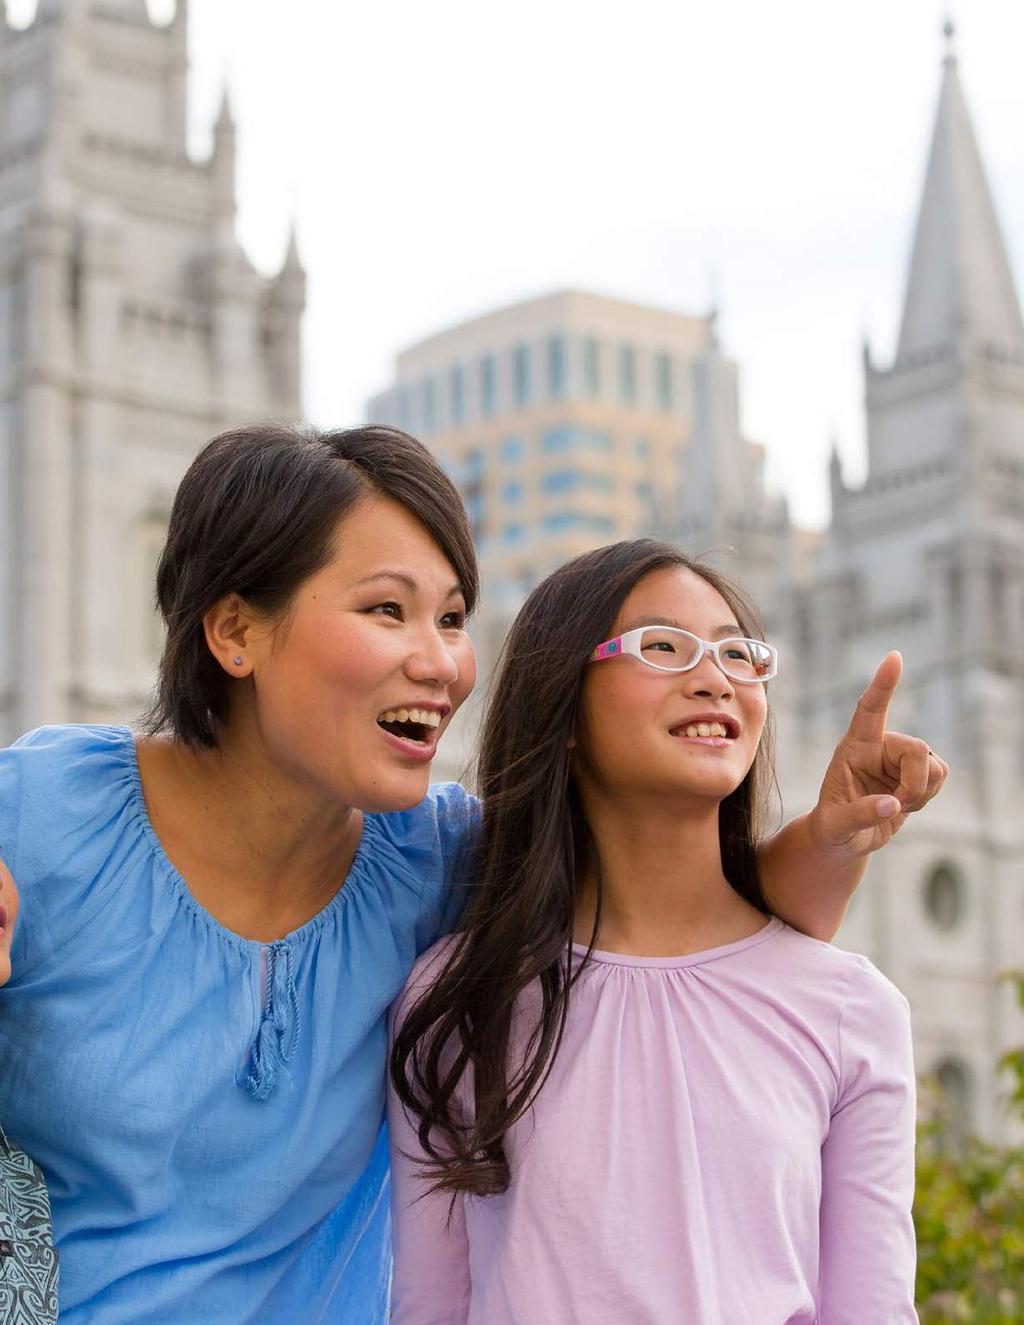 Family Adventure Temple Square is full of excitement for the whole family, from interactive